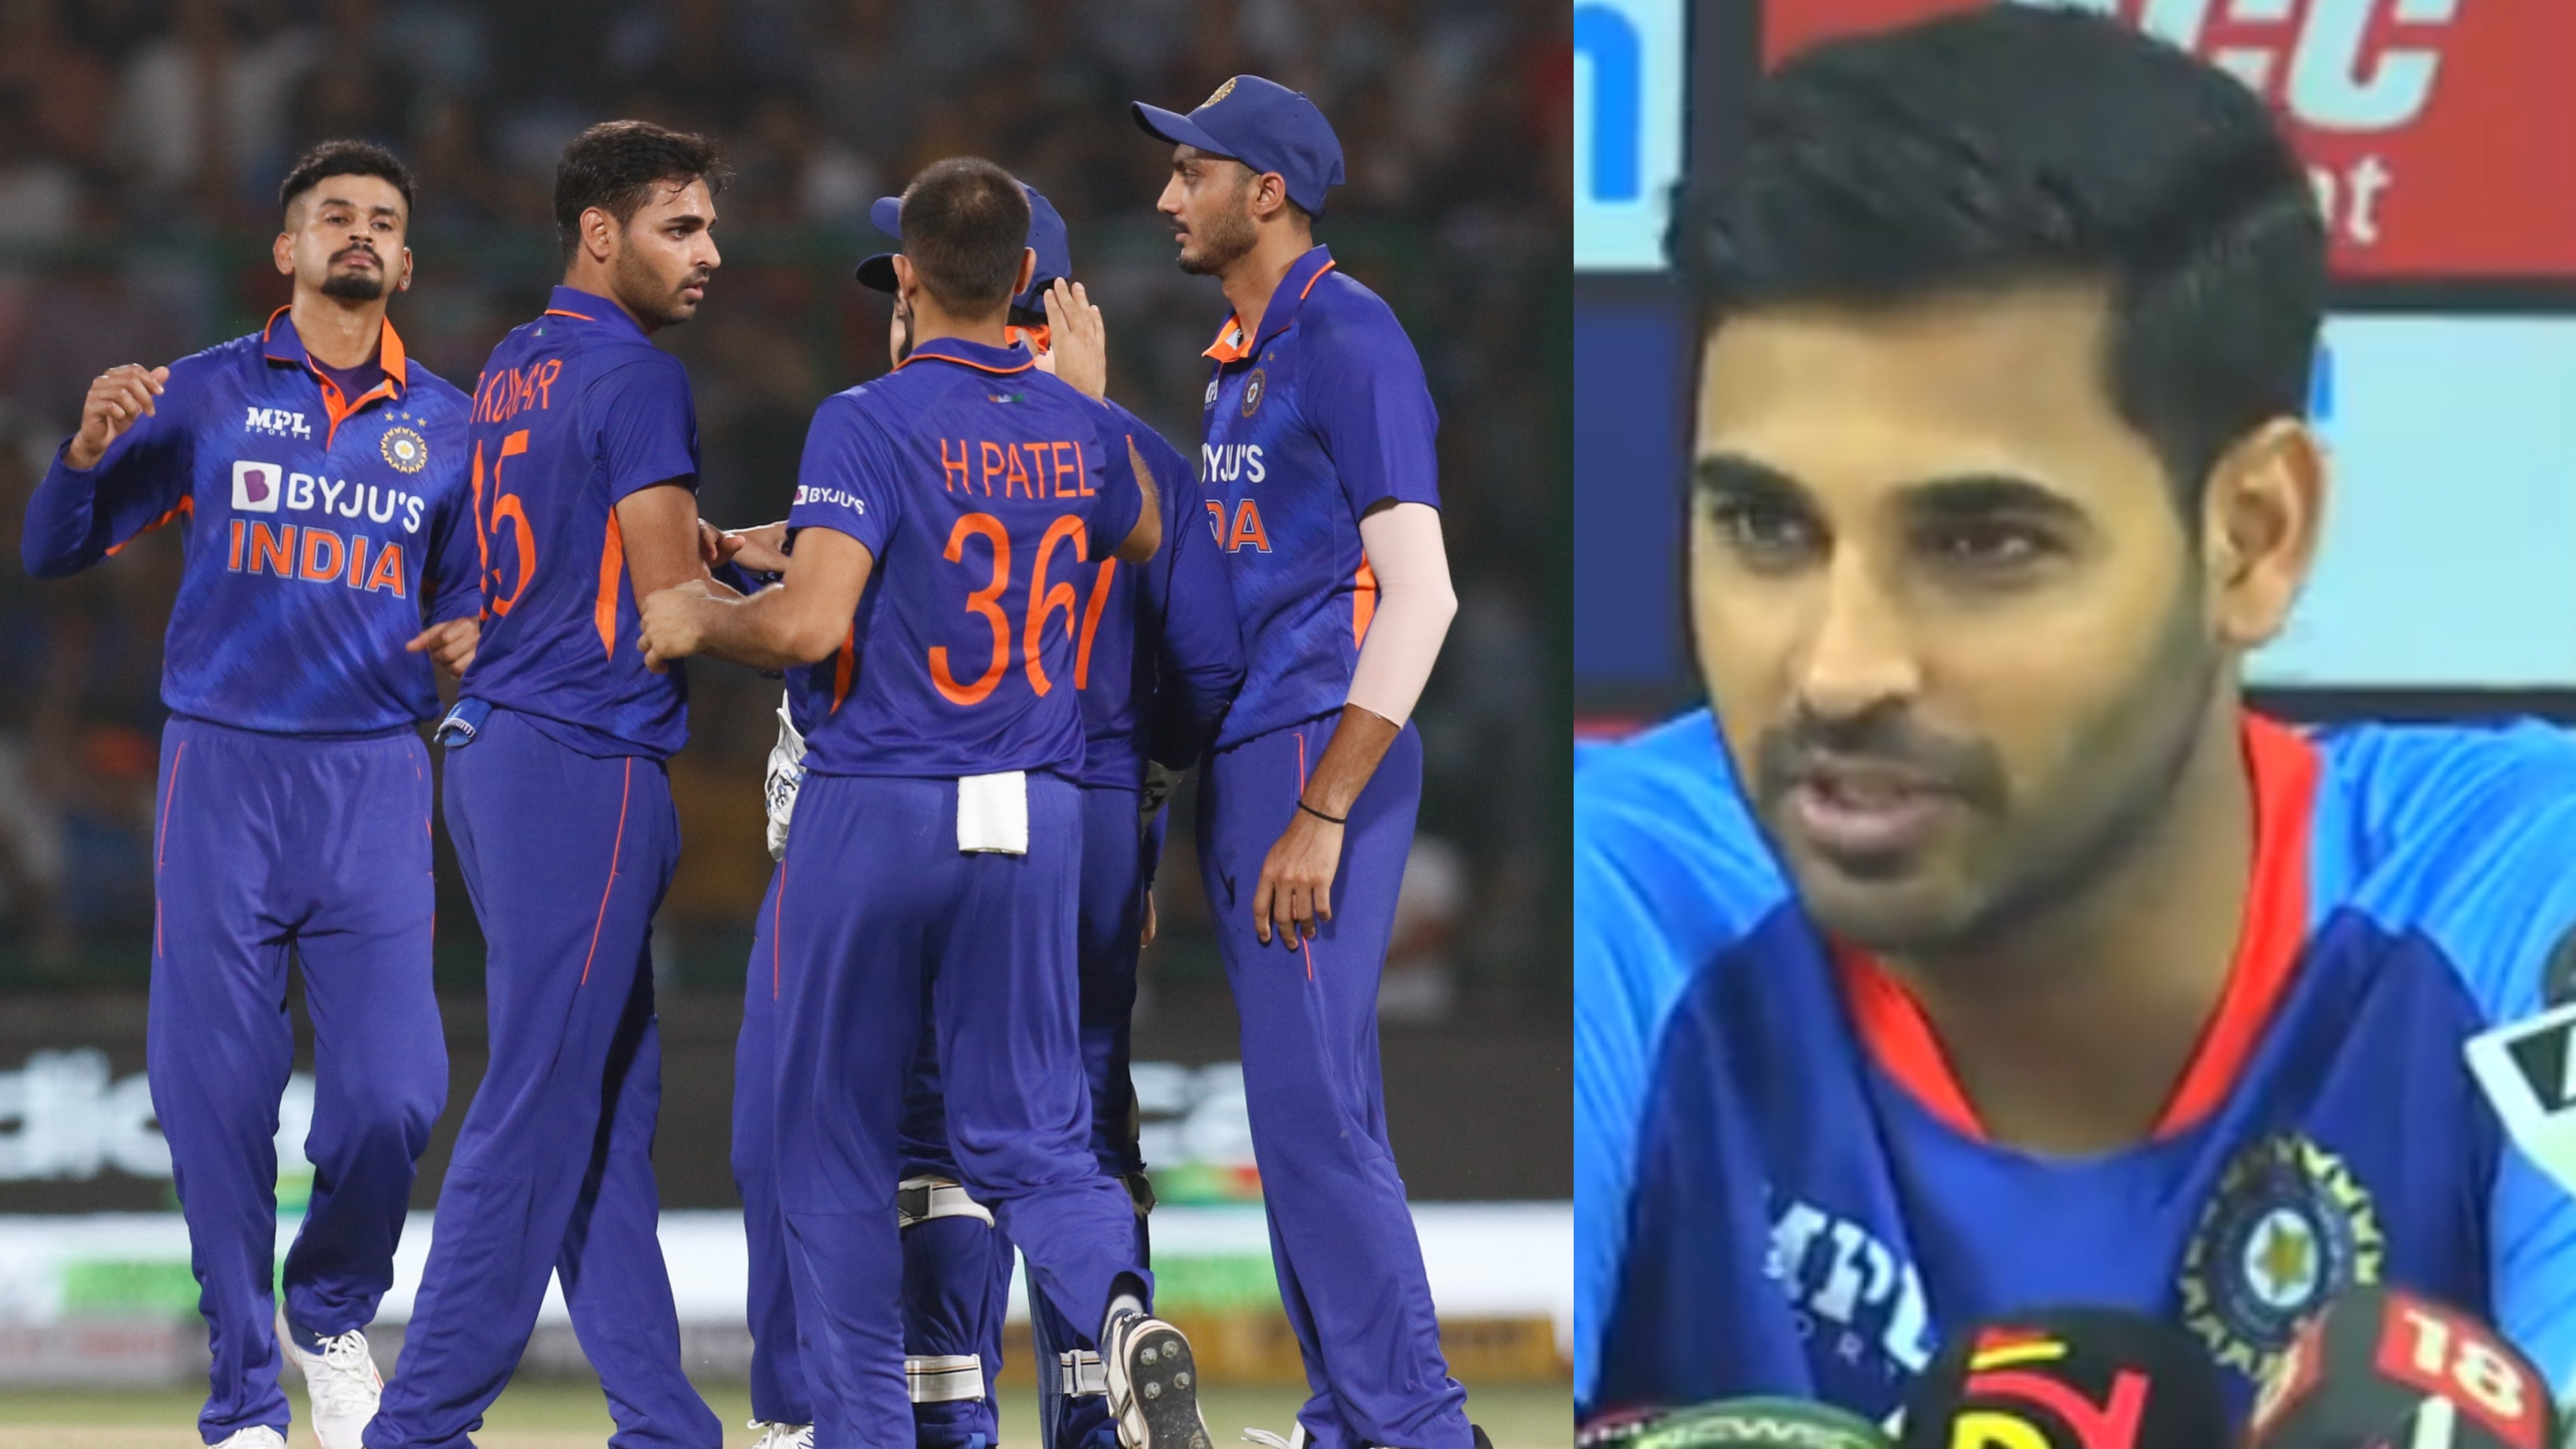 IND v SA 2022: “As a bowling unit, we had an off day”, Bhuvneshwar Kumar on India’s loss in 1st T20I